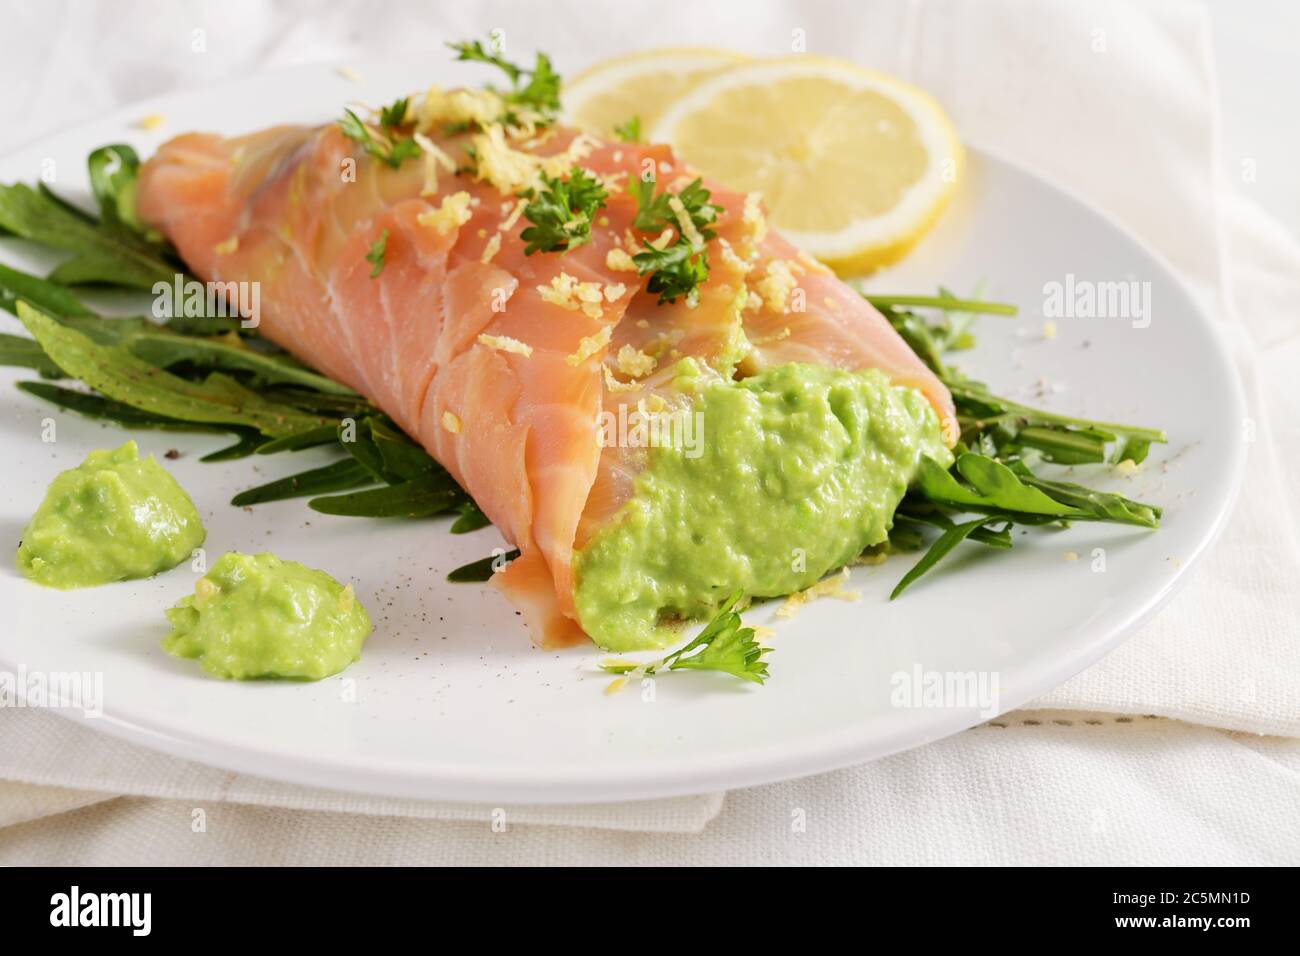 Salmon roll filled with pea puree on rocket salad with lemon slices and herb garnish on a white plate, low carb meal, selected focus, narrow depth of Stock Photo